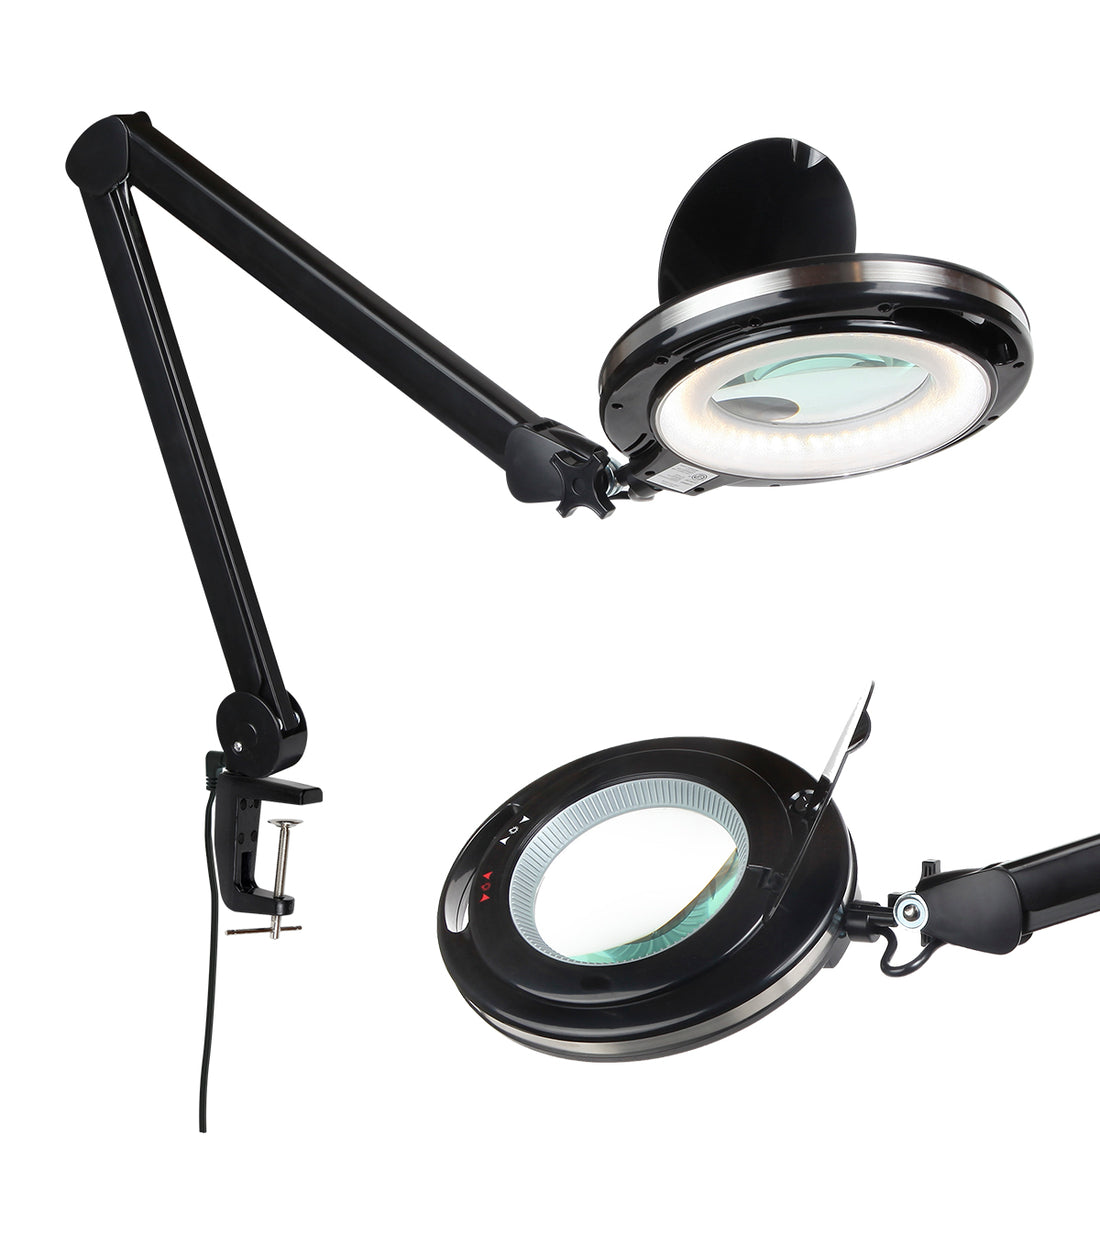 Brightech Lightview Pro Led Rolling Base Magnifier Floor Lamp 3